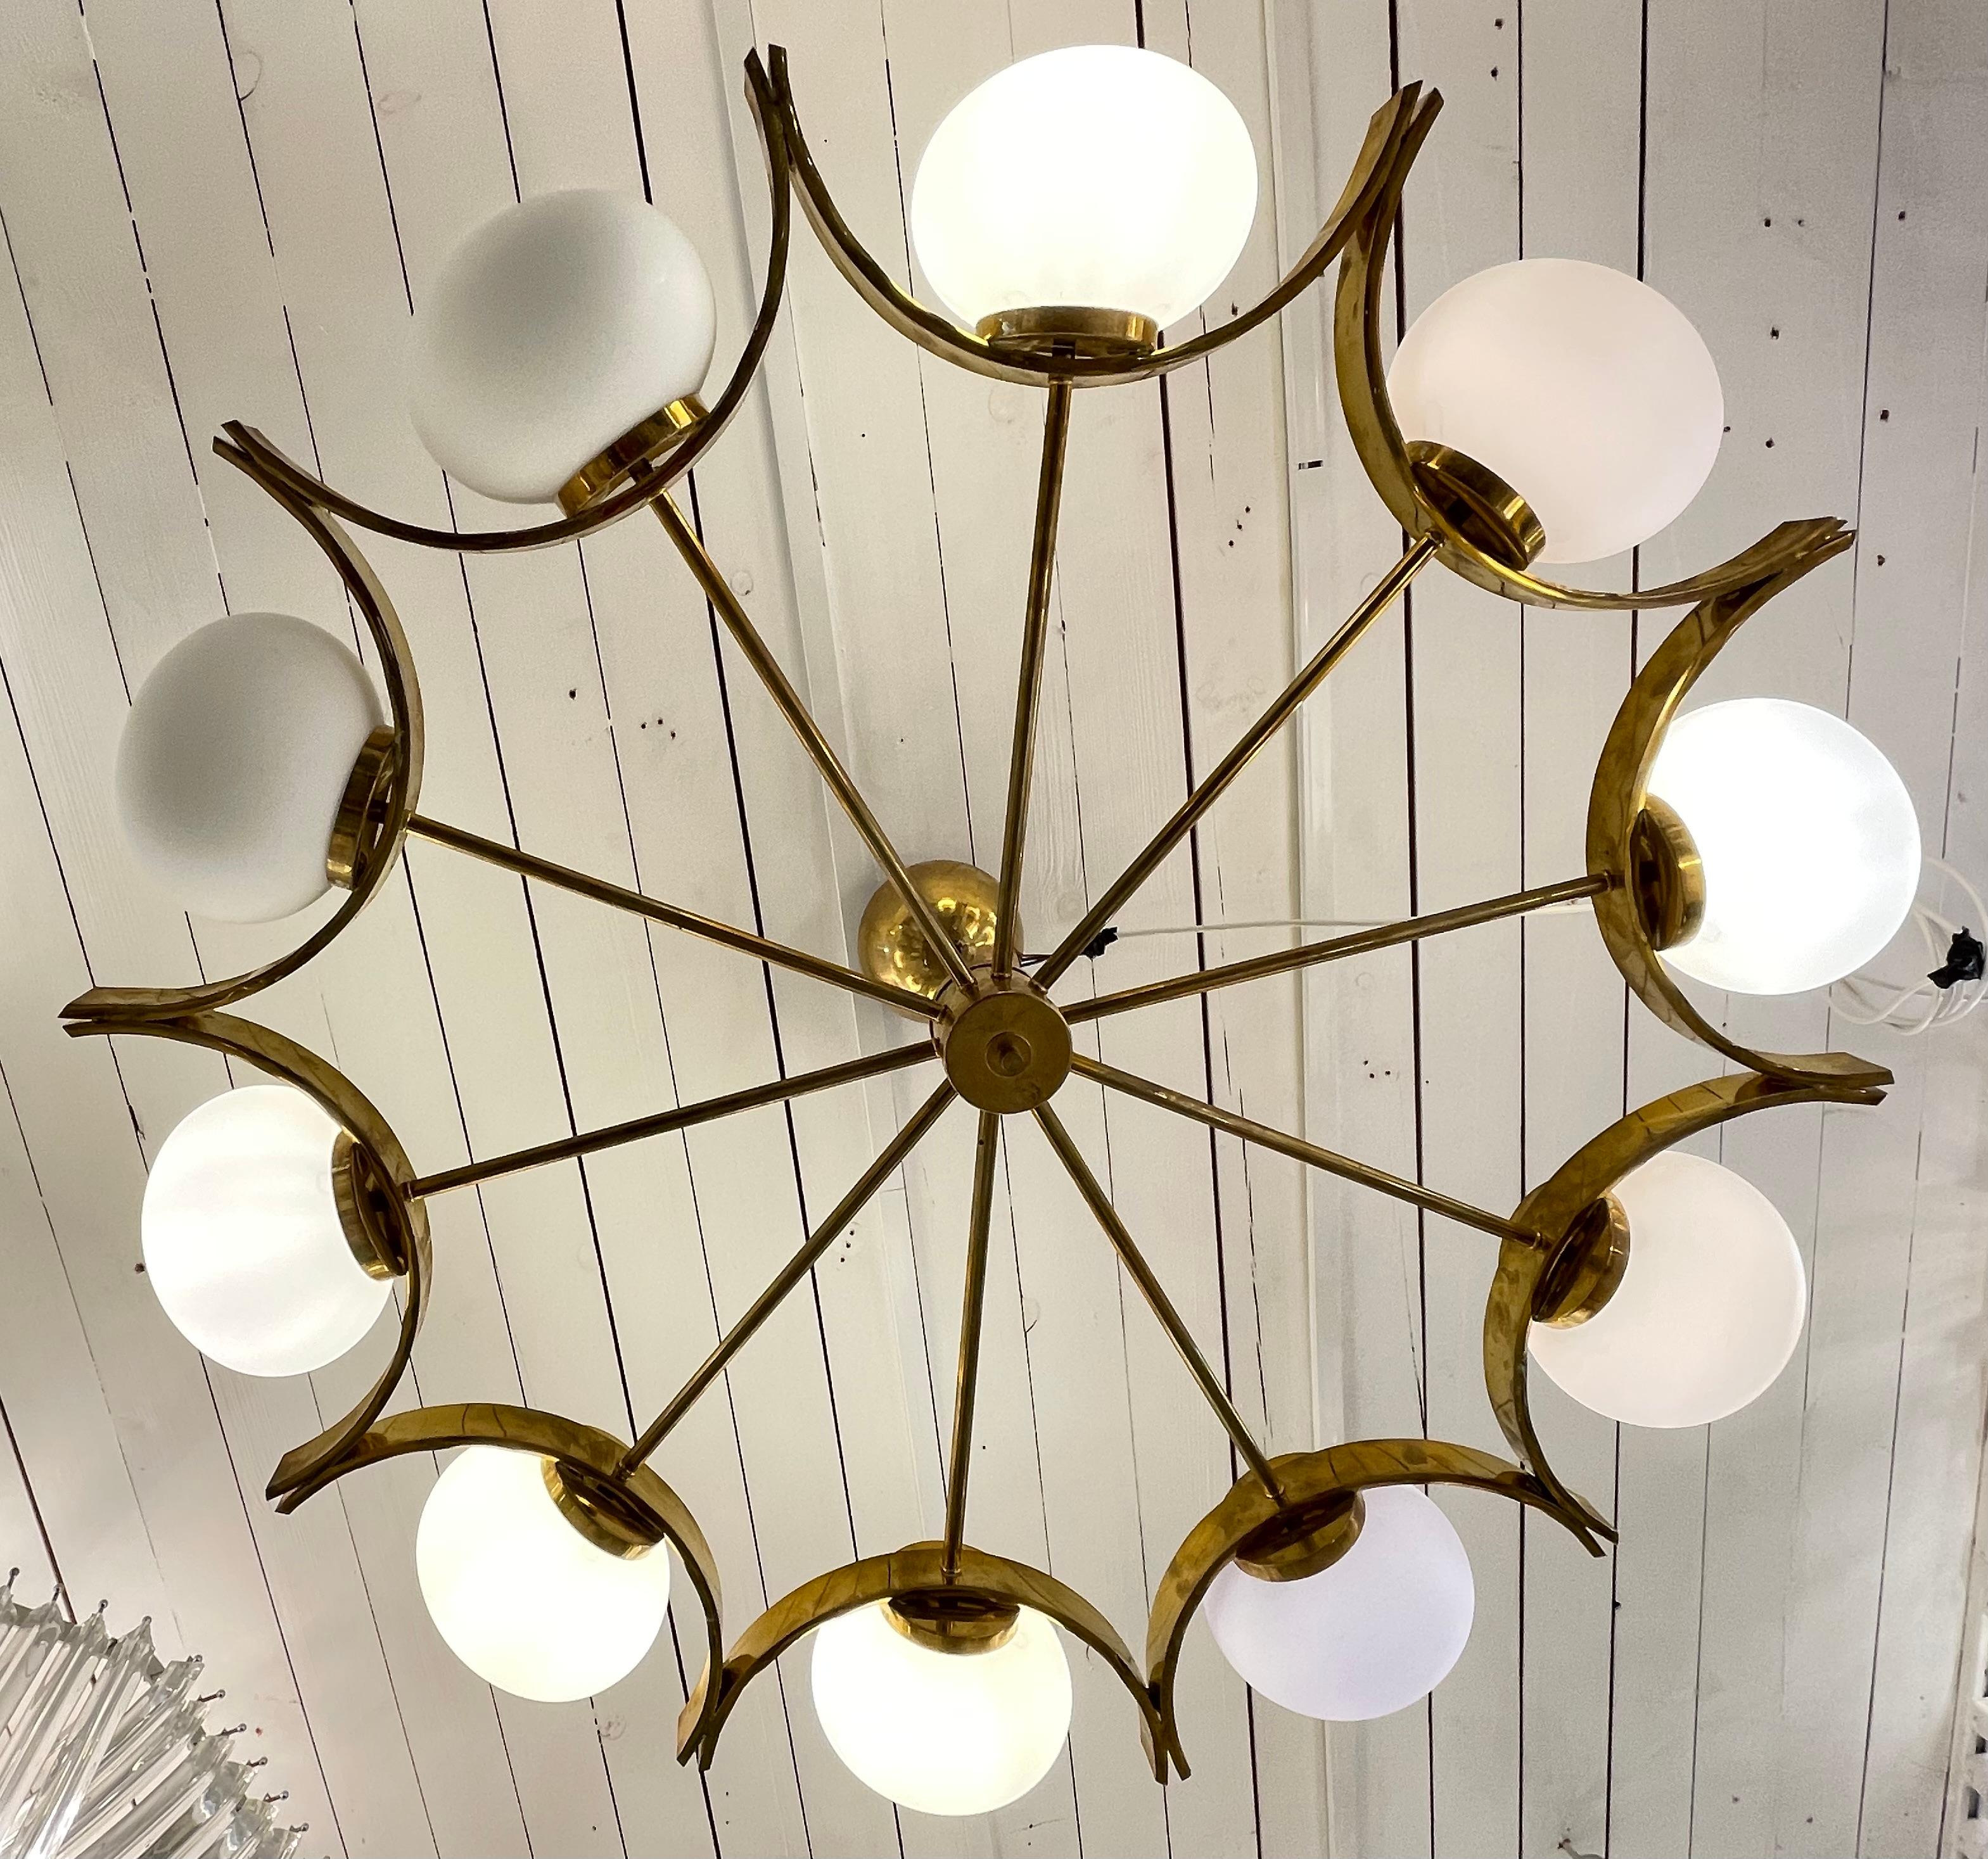 An elegant modernist Italian chandelier in brass with 10 large shades in white frosted glass, circa 1960.